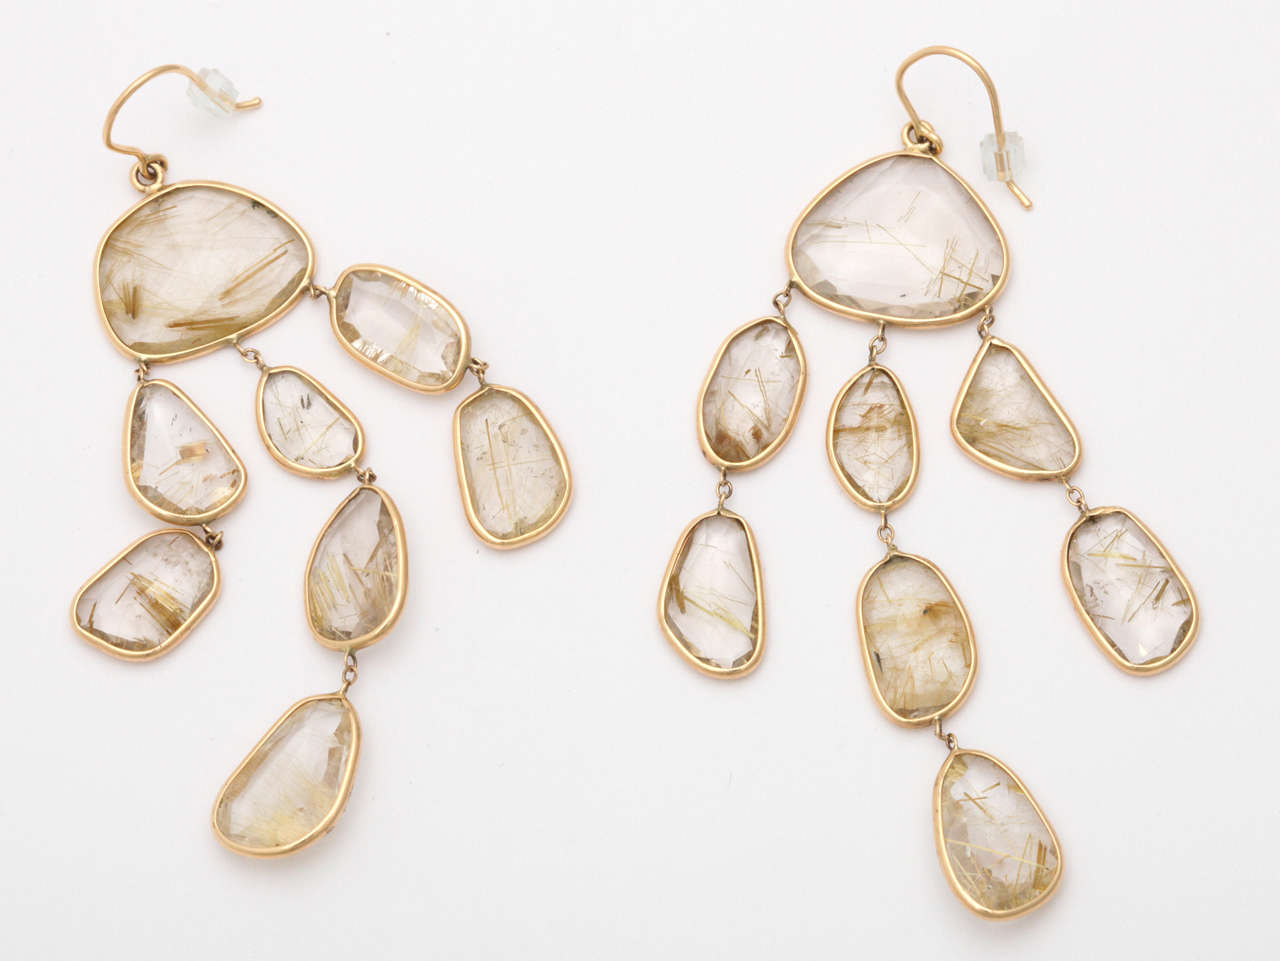 Fabulous Faceted & rutilated Topaz quartz Earrings set in 18kt Yellow Gold Wire work.